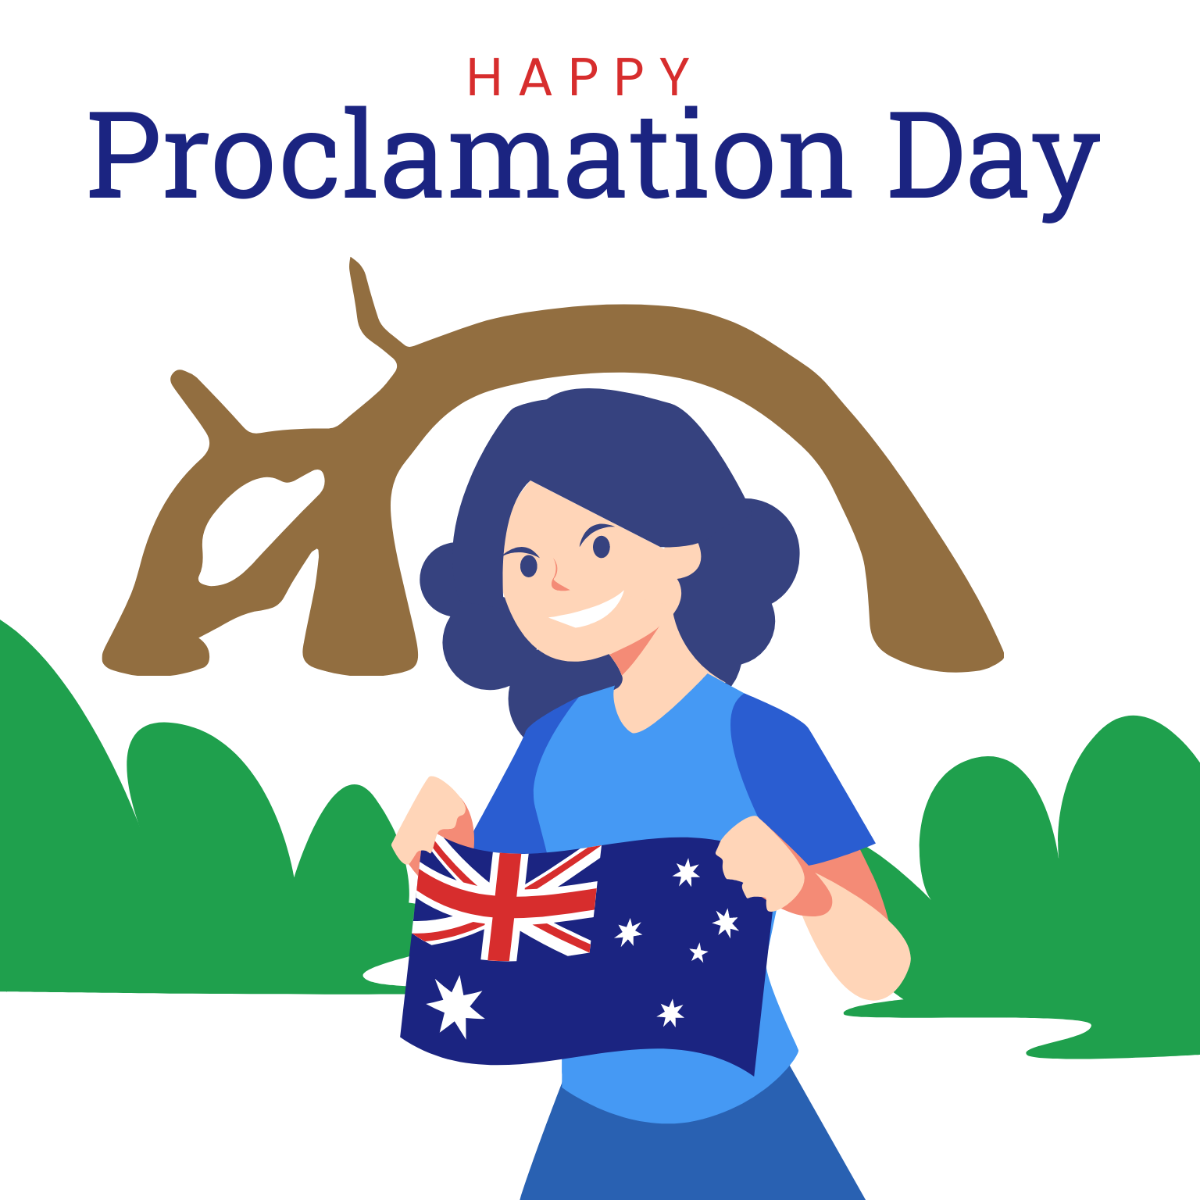 Free Happy Proclamation Day Illustration Template